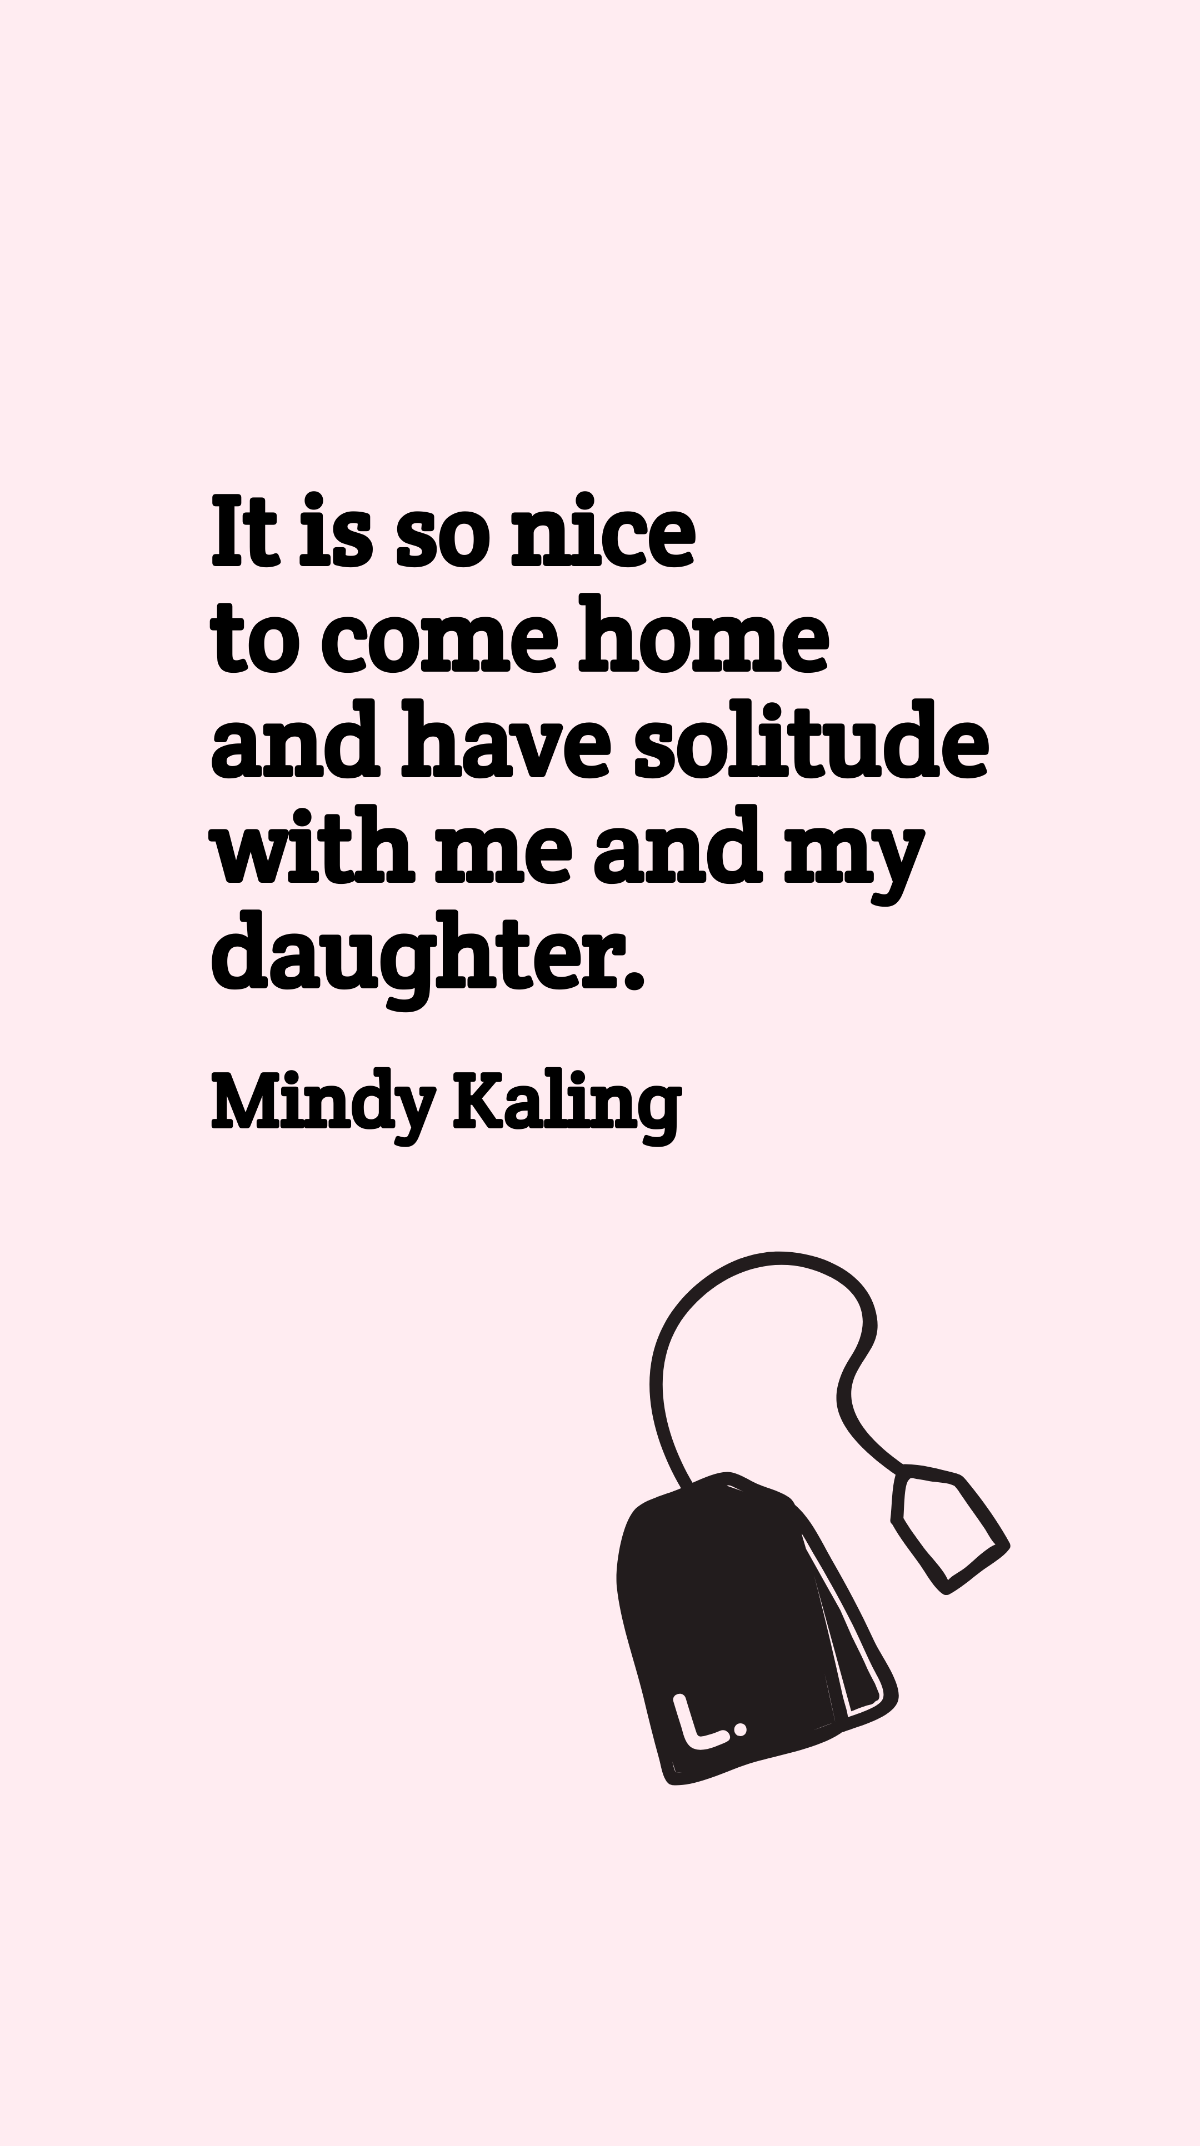 Free Mindy Kaling - It is so nice to come home and have solitude with me and my daughter. Template